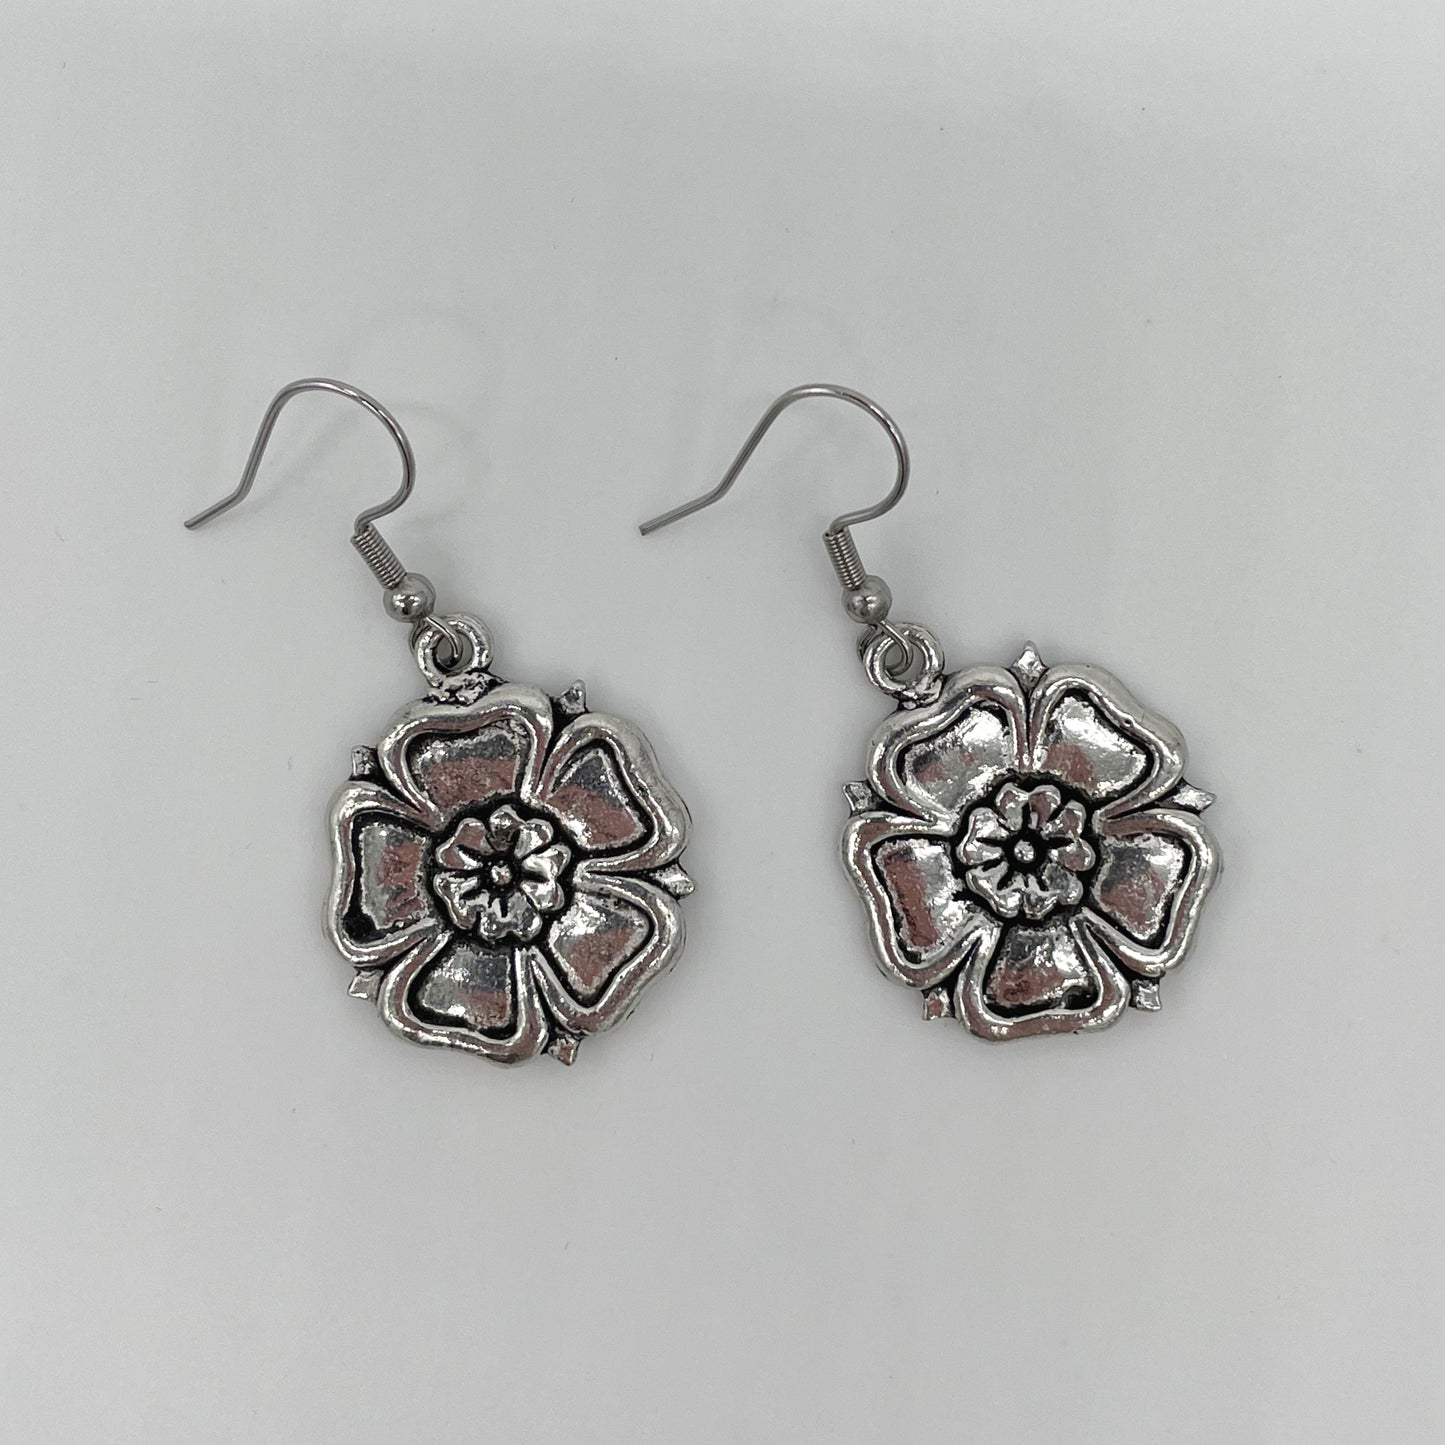 Yorkshire Rose Pewter Earrings - The Great Yorkshire Shop